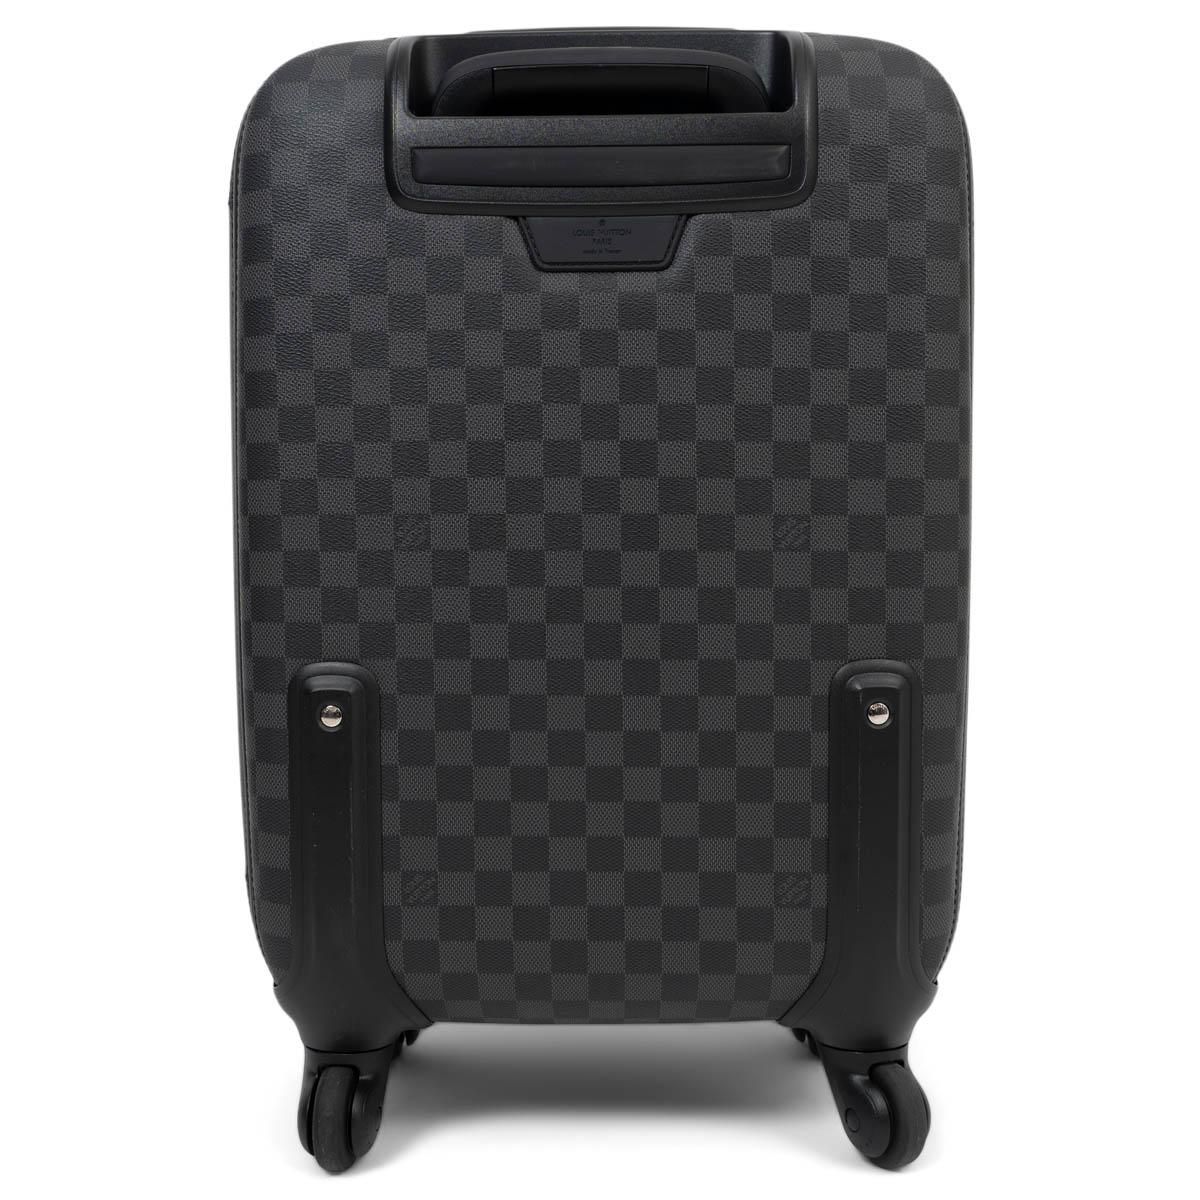 100% authentic Louis Vuitton Zephyr 55 trolley case in Graphite Damier Canvas with leather trim. The Zephyr rolling suitcase has silent wheels that twist and turn on four multi-directional wheels, letting you travel in ease as well as style. 1